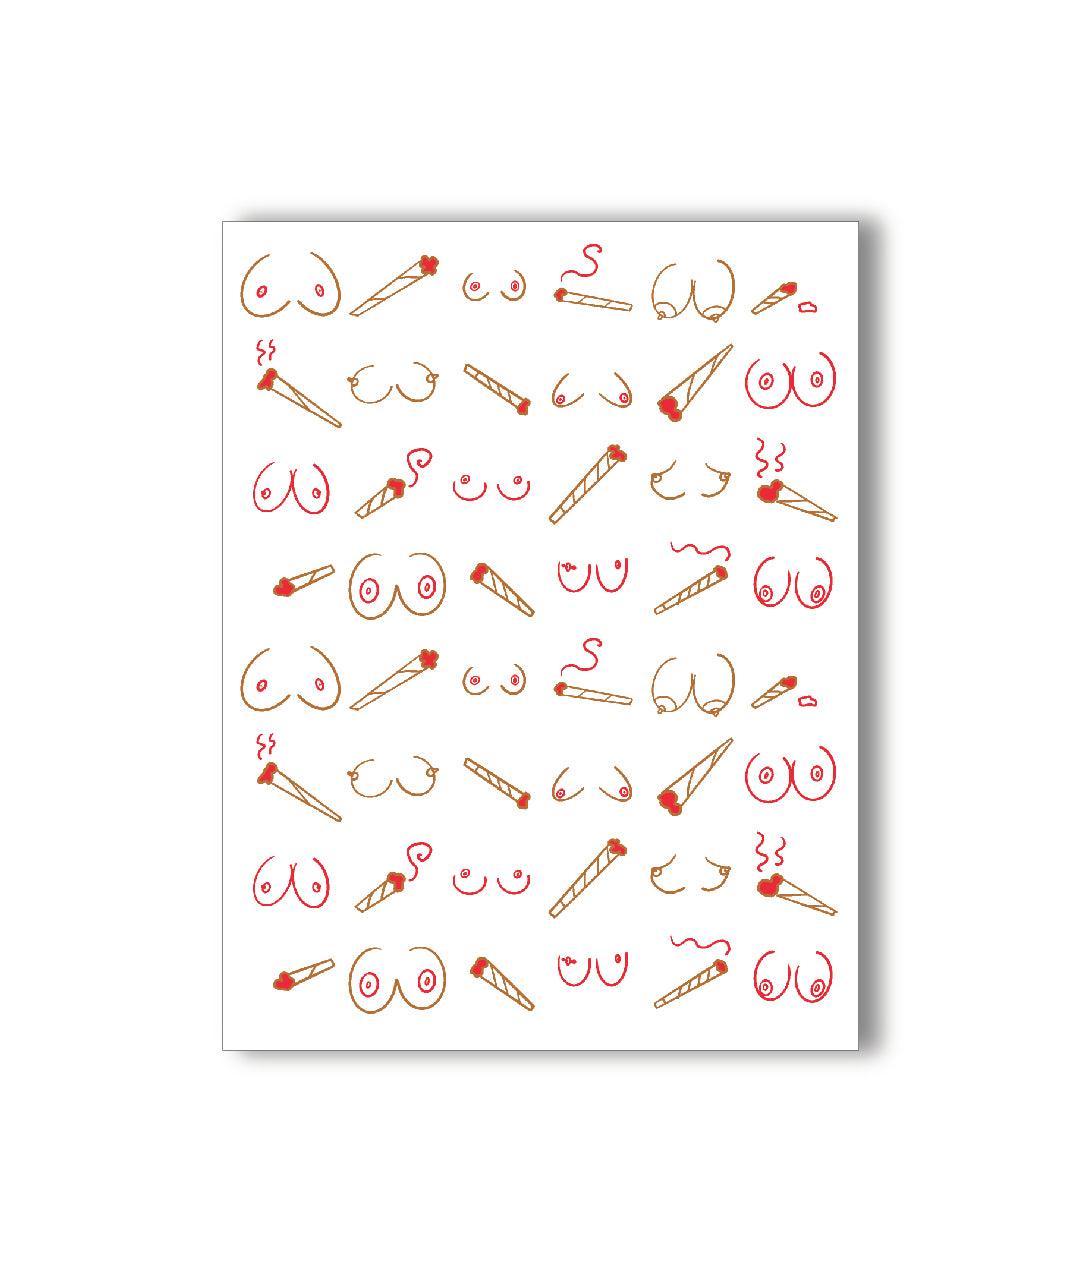 KKARDS Doobies & Boobies Card front view featuring playful illustrations, perfect for a cheeky gift